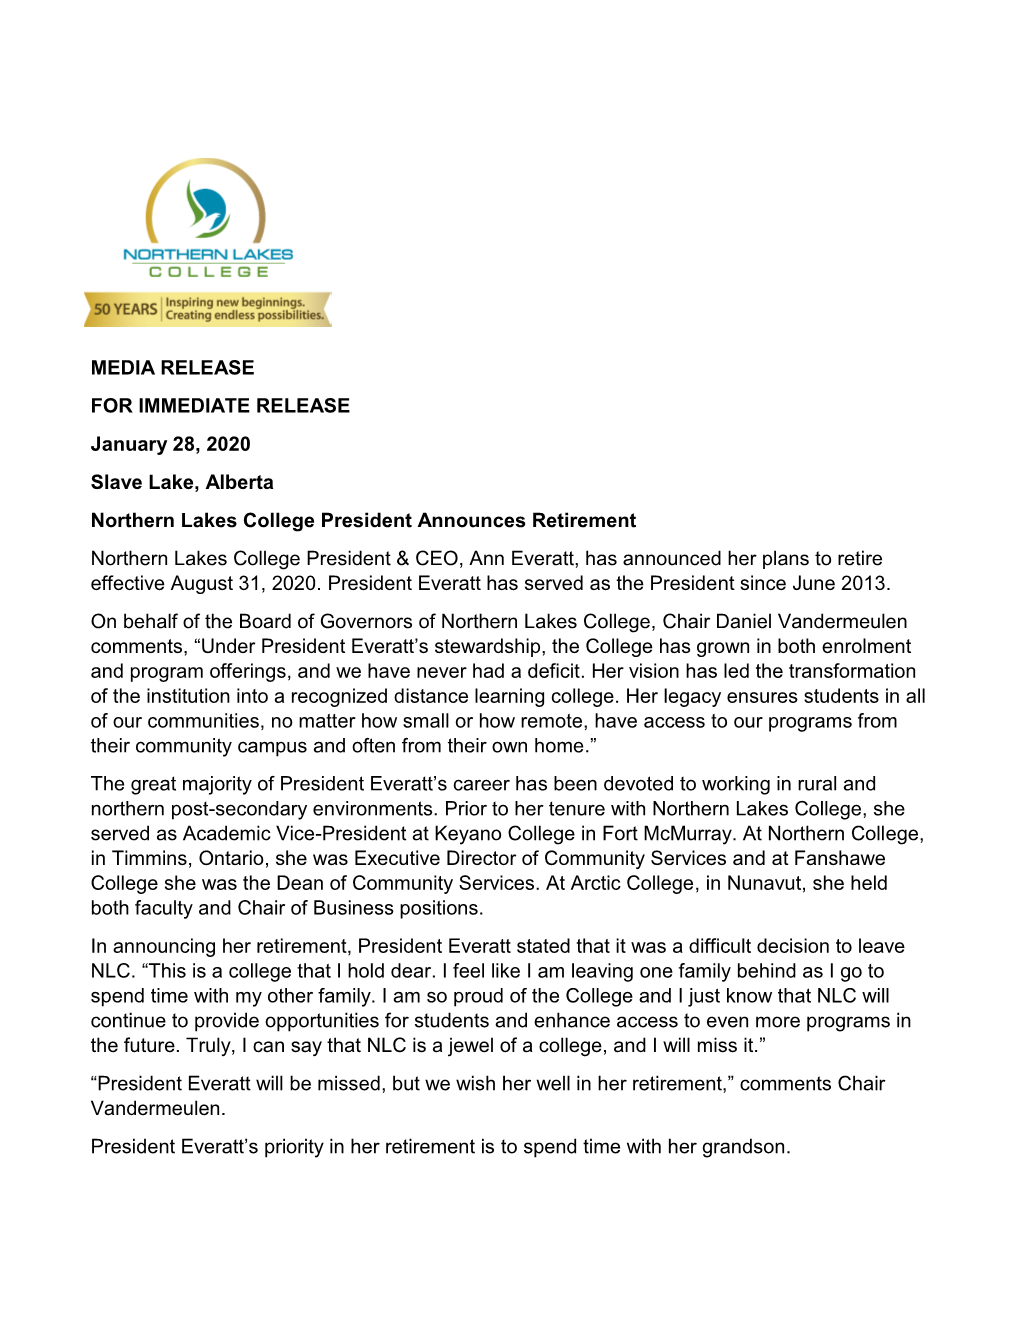 MEDIA RELEASE for IMMEDIATE RELEASE January 28, 2020 Slave Lake, Alberta Northern Lakes College President Announces Retirement N